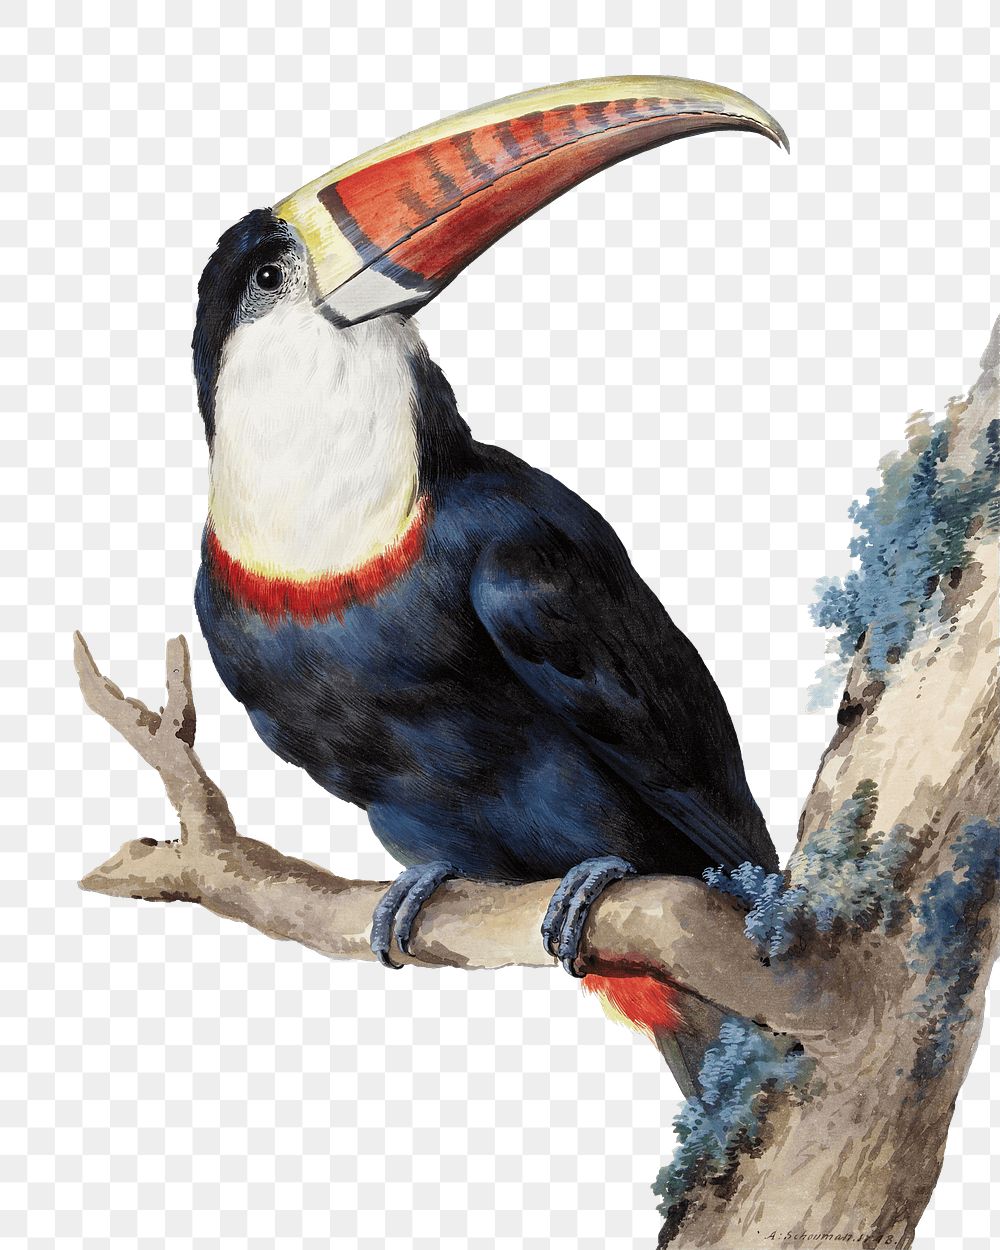 Red billed toucan png illustration, remixed from artworks by Aert Schouman